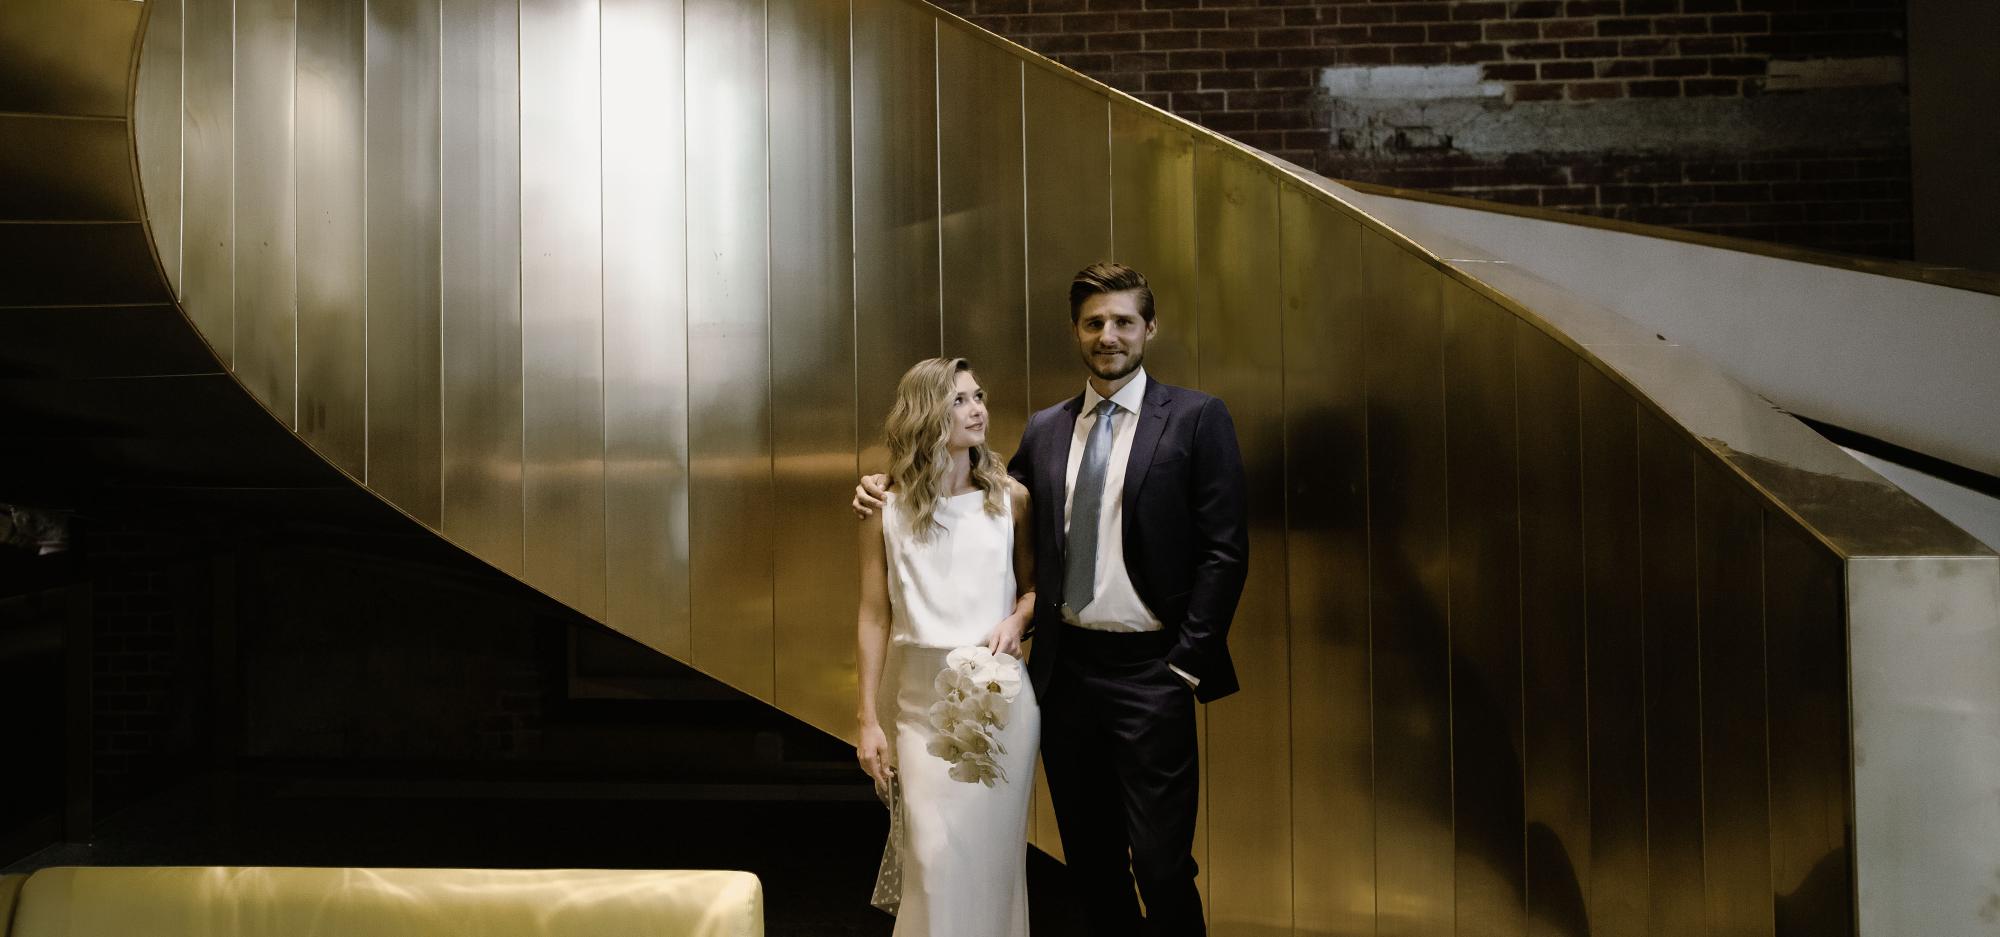 A couple in wedding attire stand beside a curving golden staircase